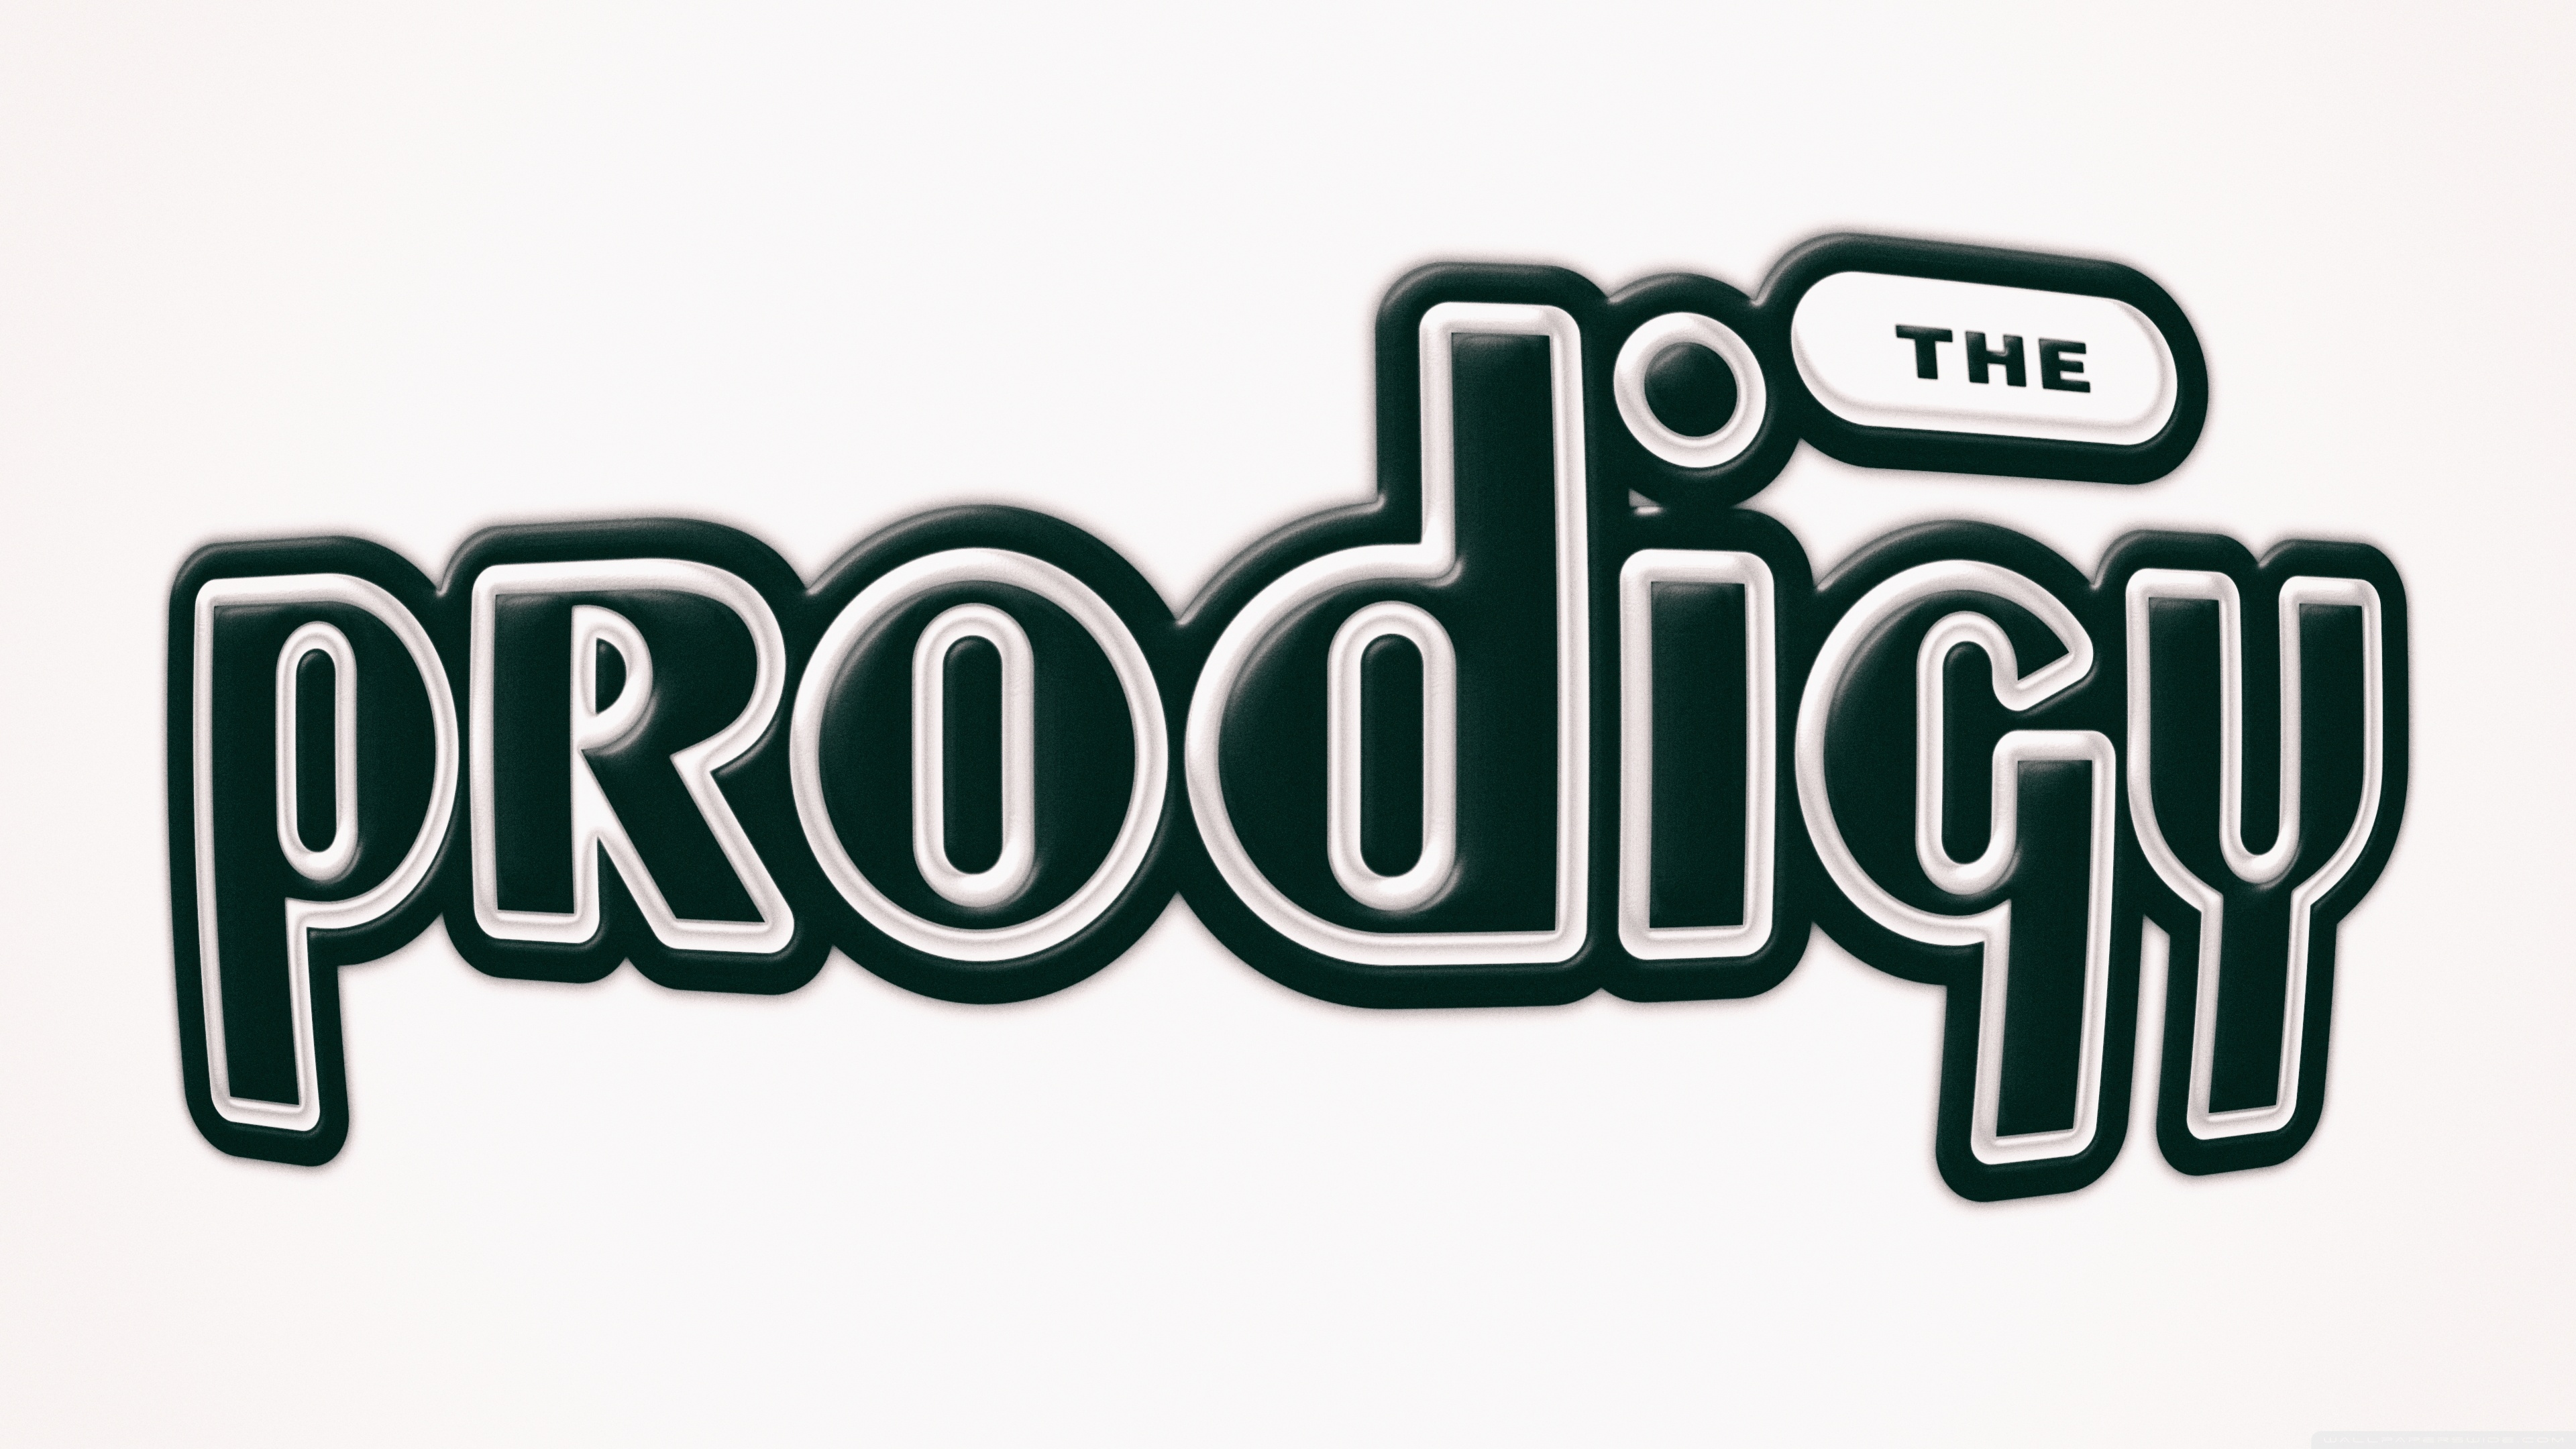 Download The Prodigy Old Logo UltraHD Free Wallpaper.